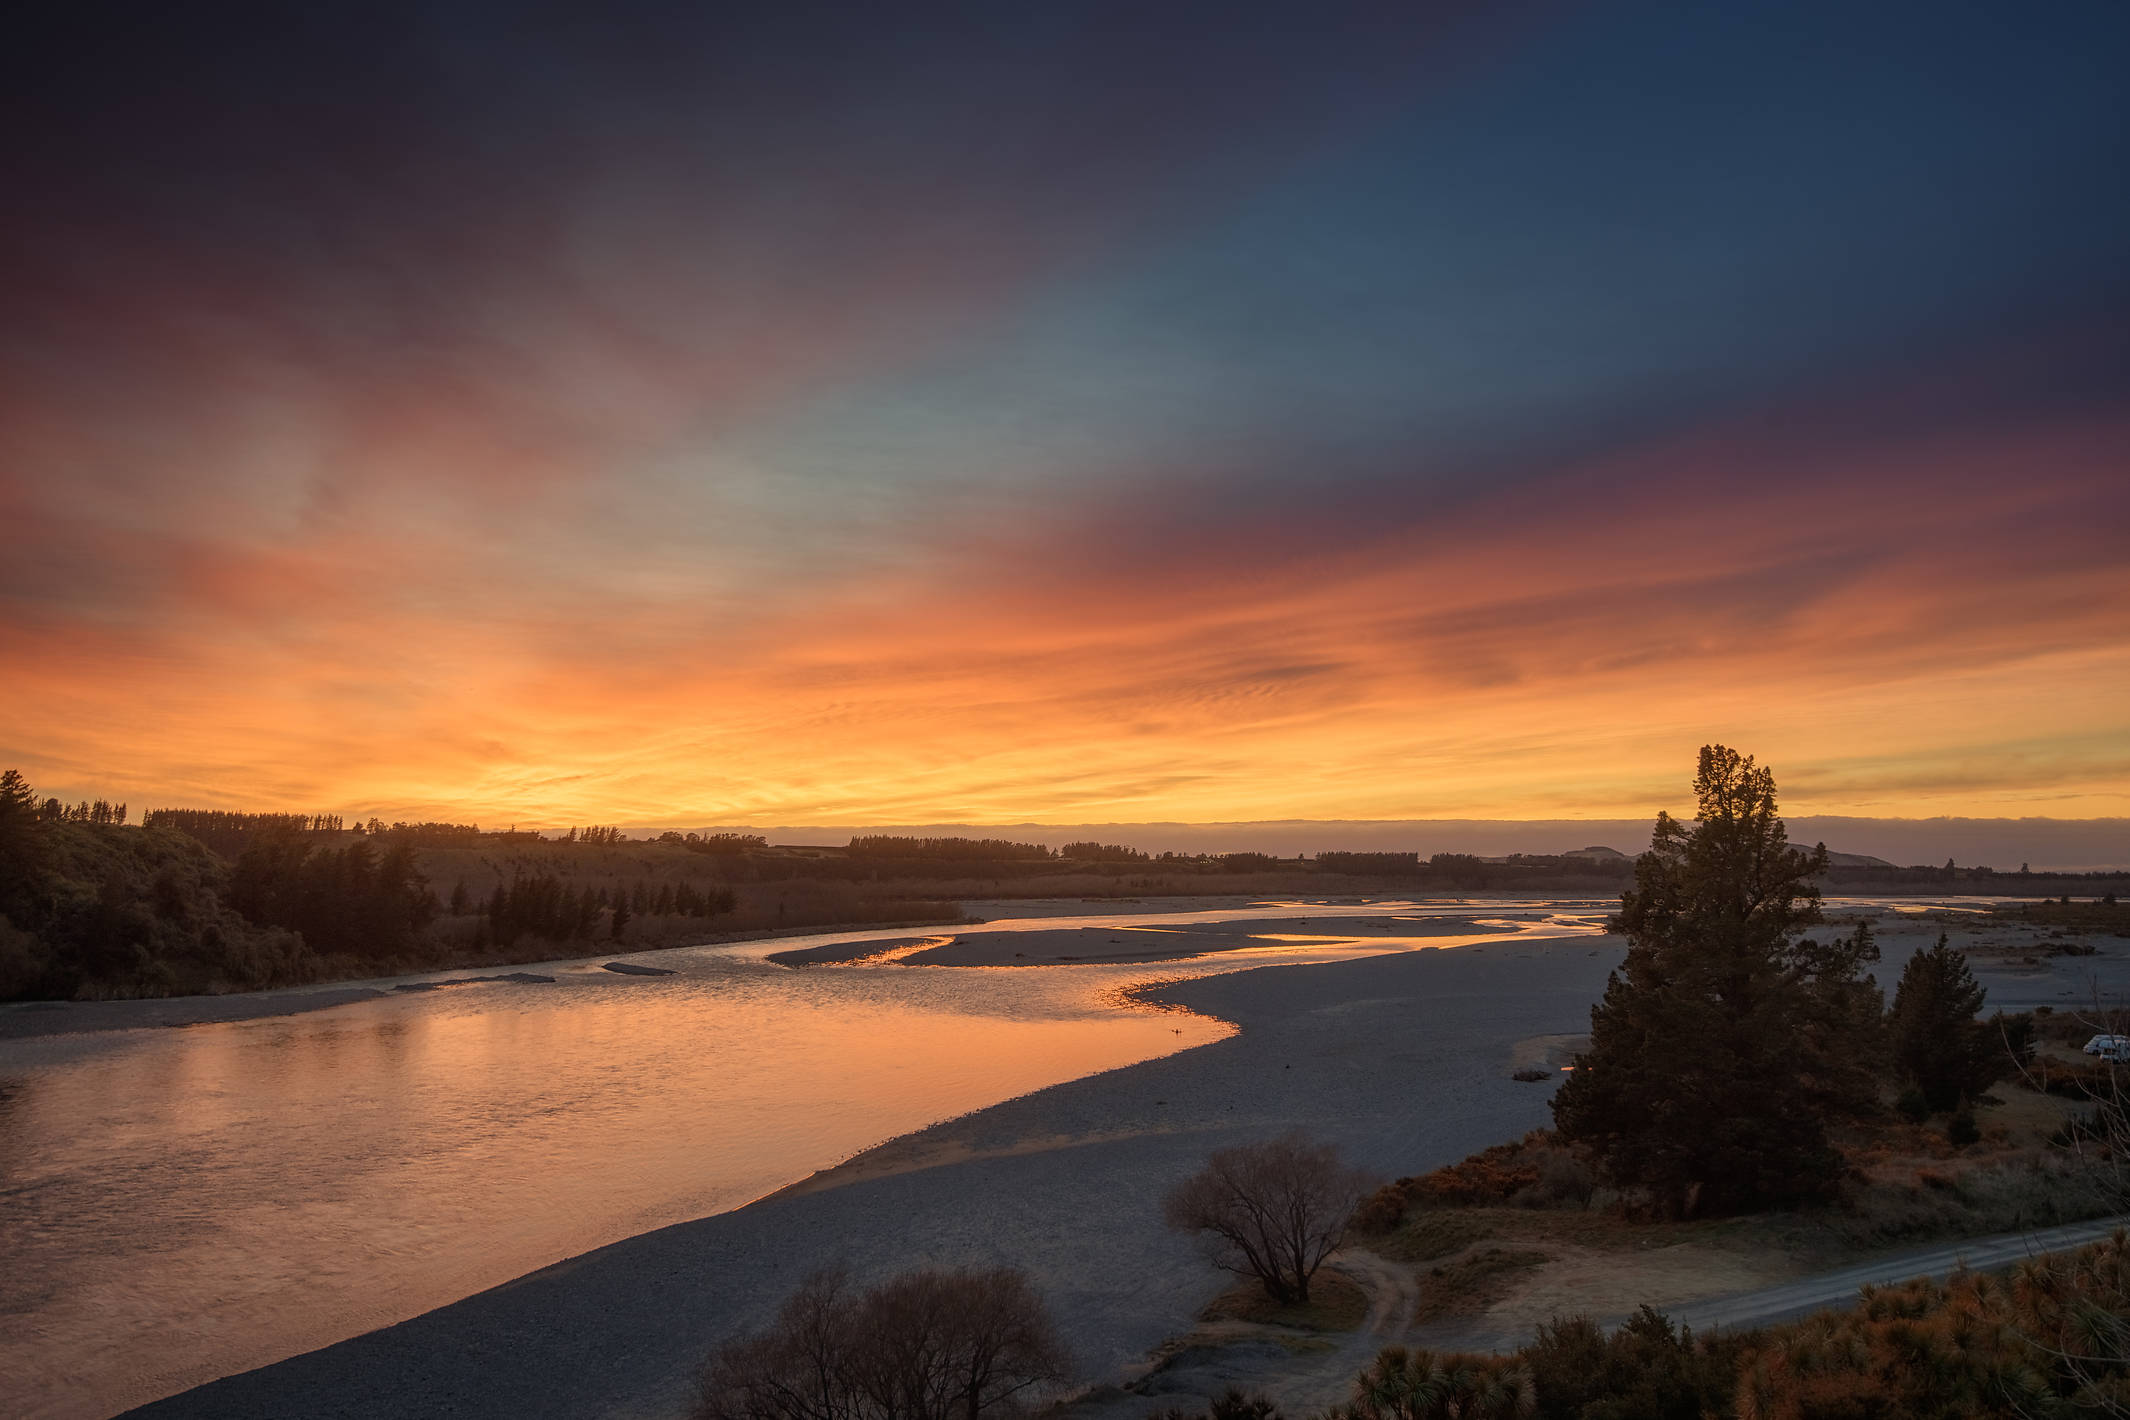 Morning bright sunrise looking out across the Waimak river in Canterbury, NZ